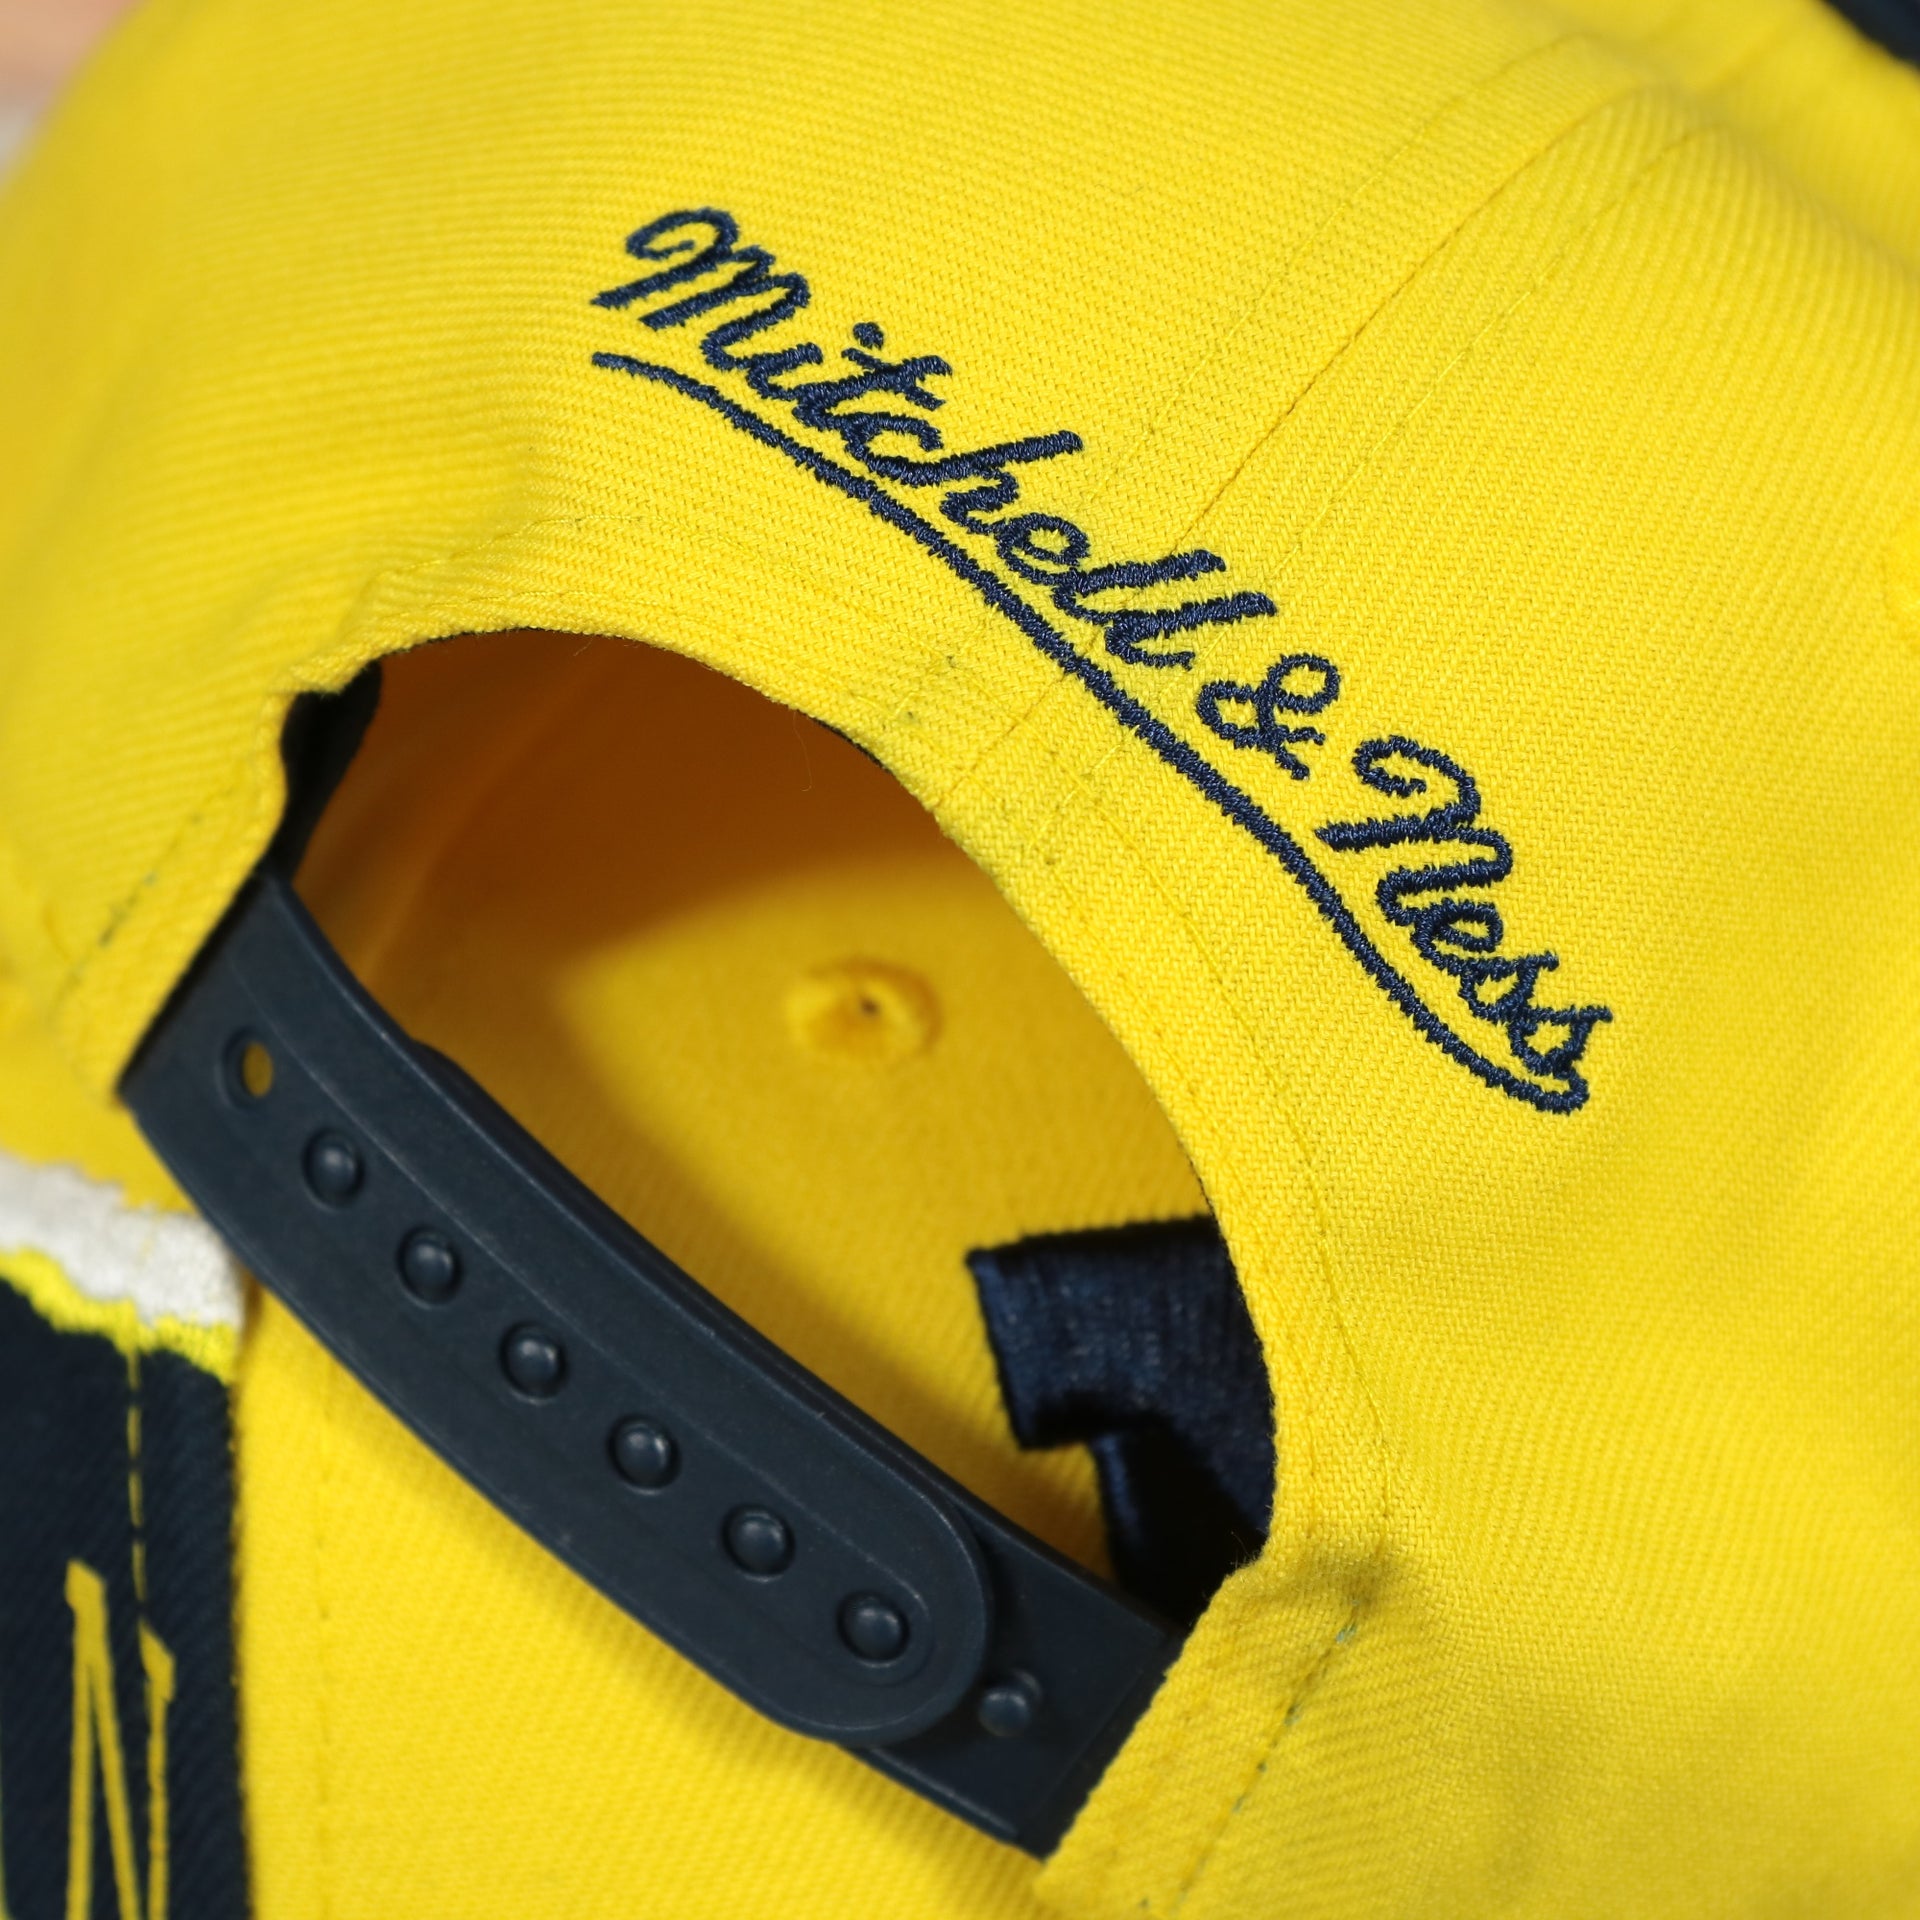 mitchell and ness logo on the Michigan Wolverines NCAA Jumbotron "Michigan" Ripped Wordmark side patch Grey Bottom Yellow/Navy Snapback hat | Mitchell and Ness Two Tone Snap Cap